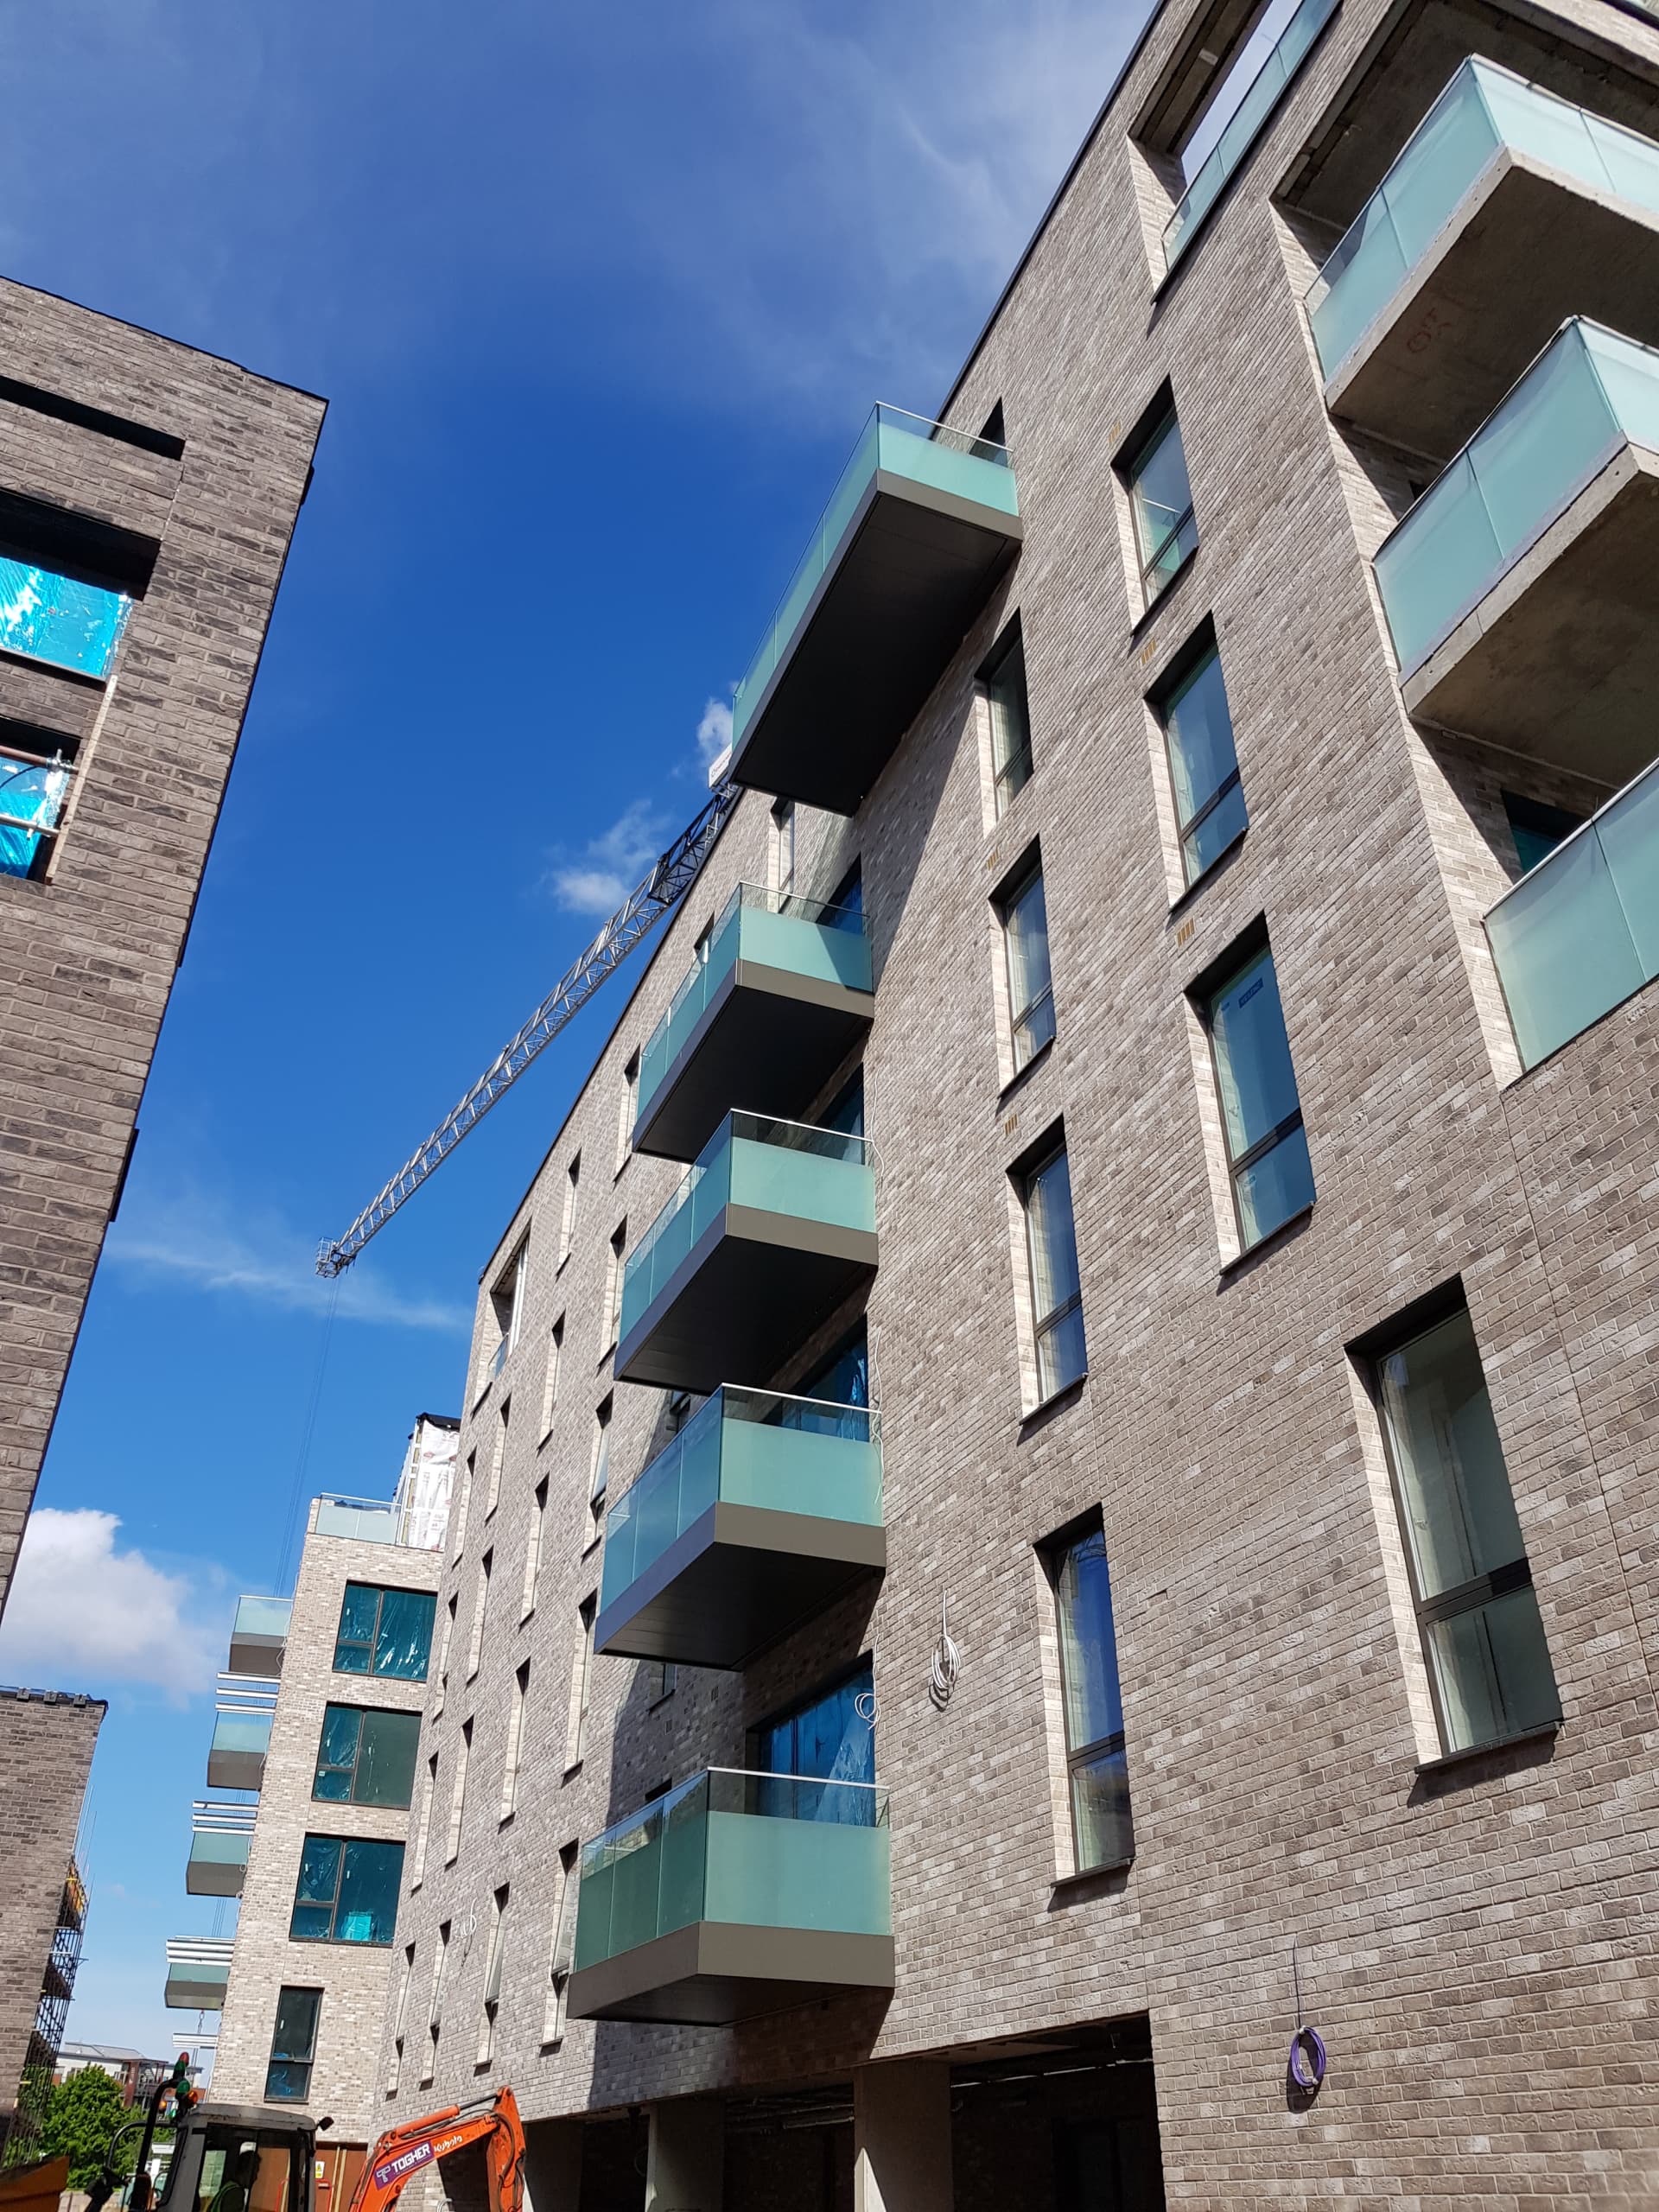 greenwich millennium village phase 5 glide on balconies sapphire laminate glass piped drainage